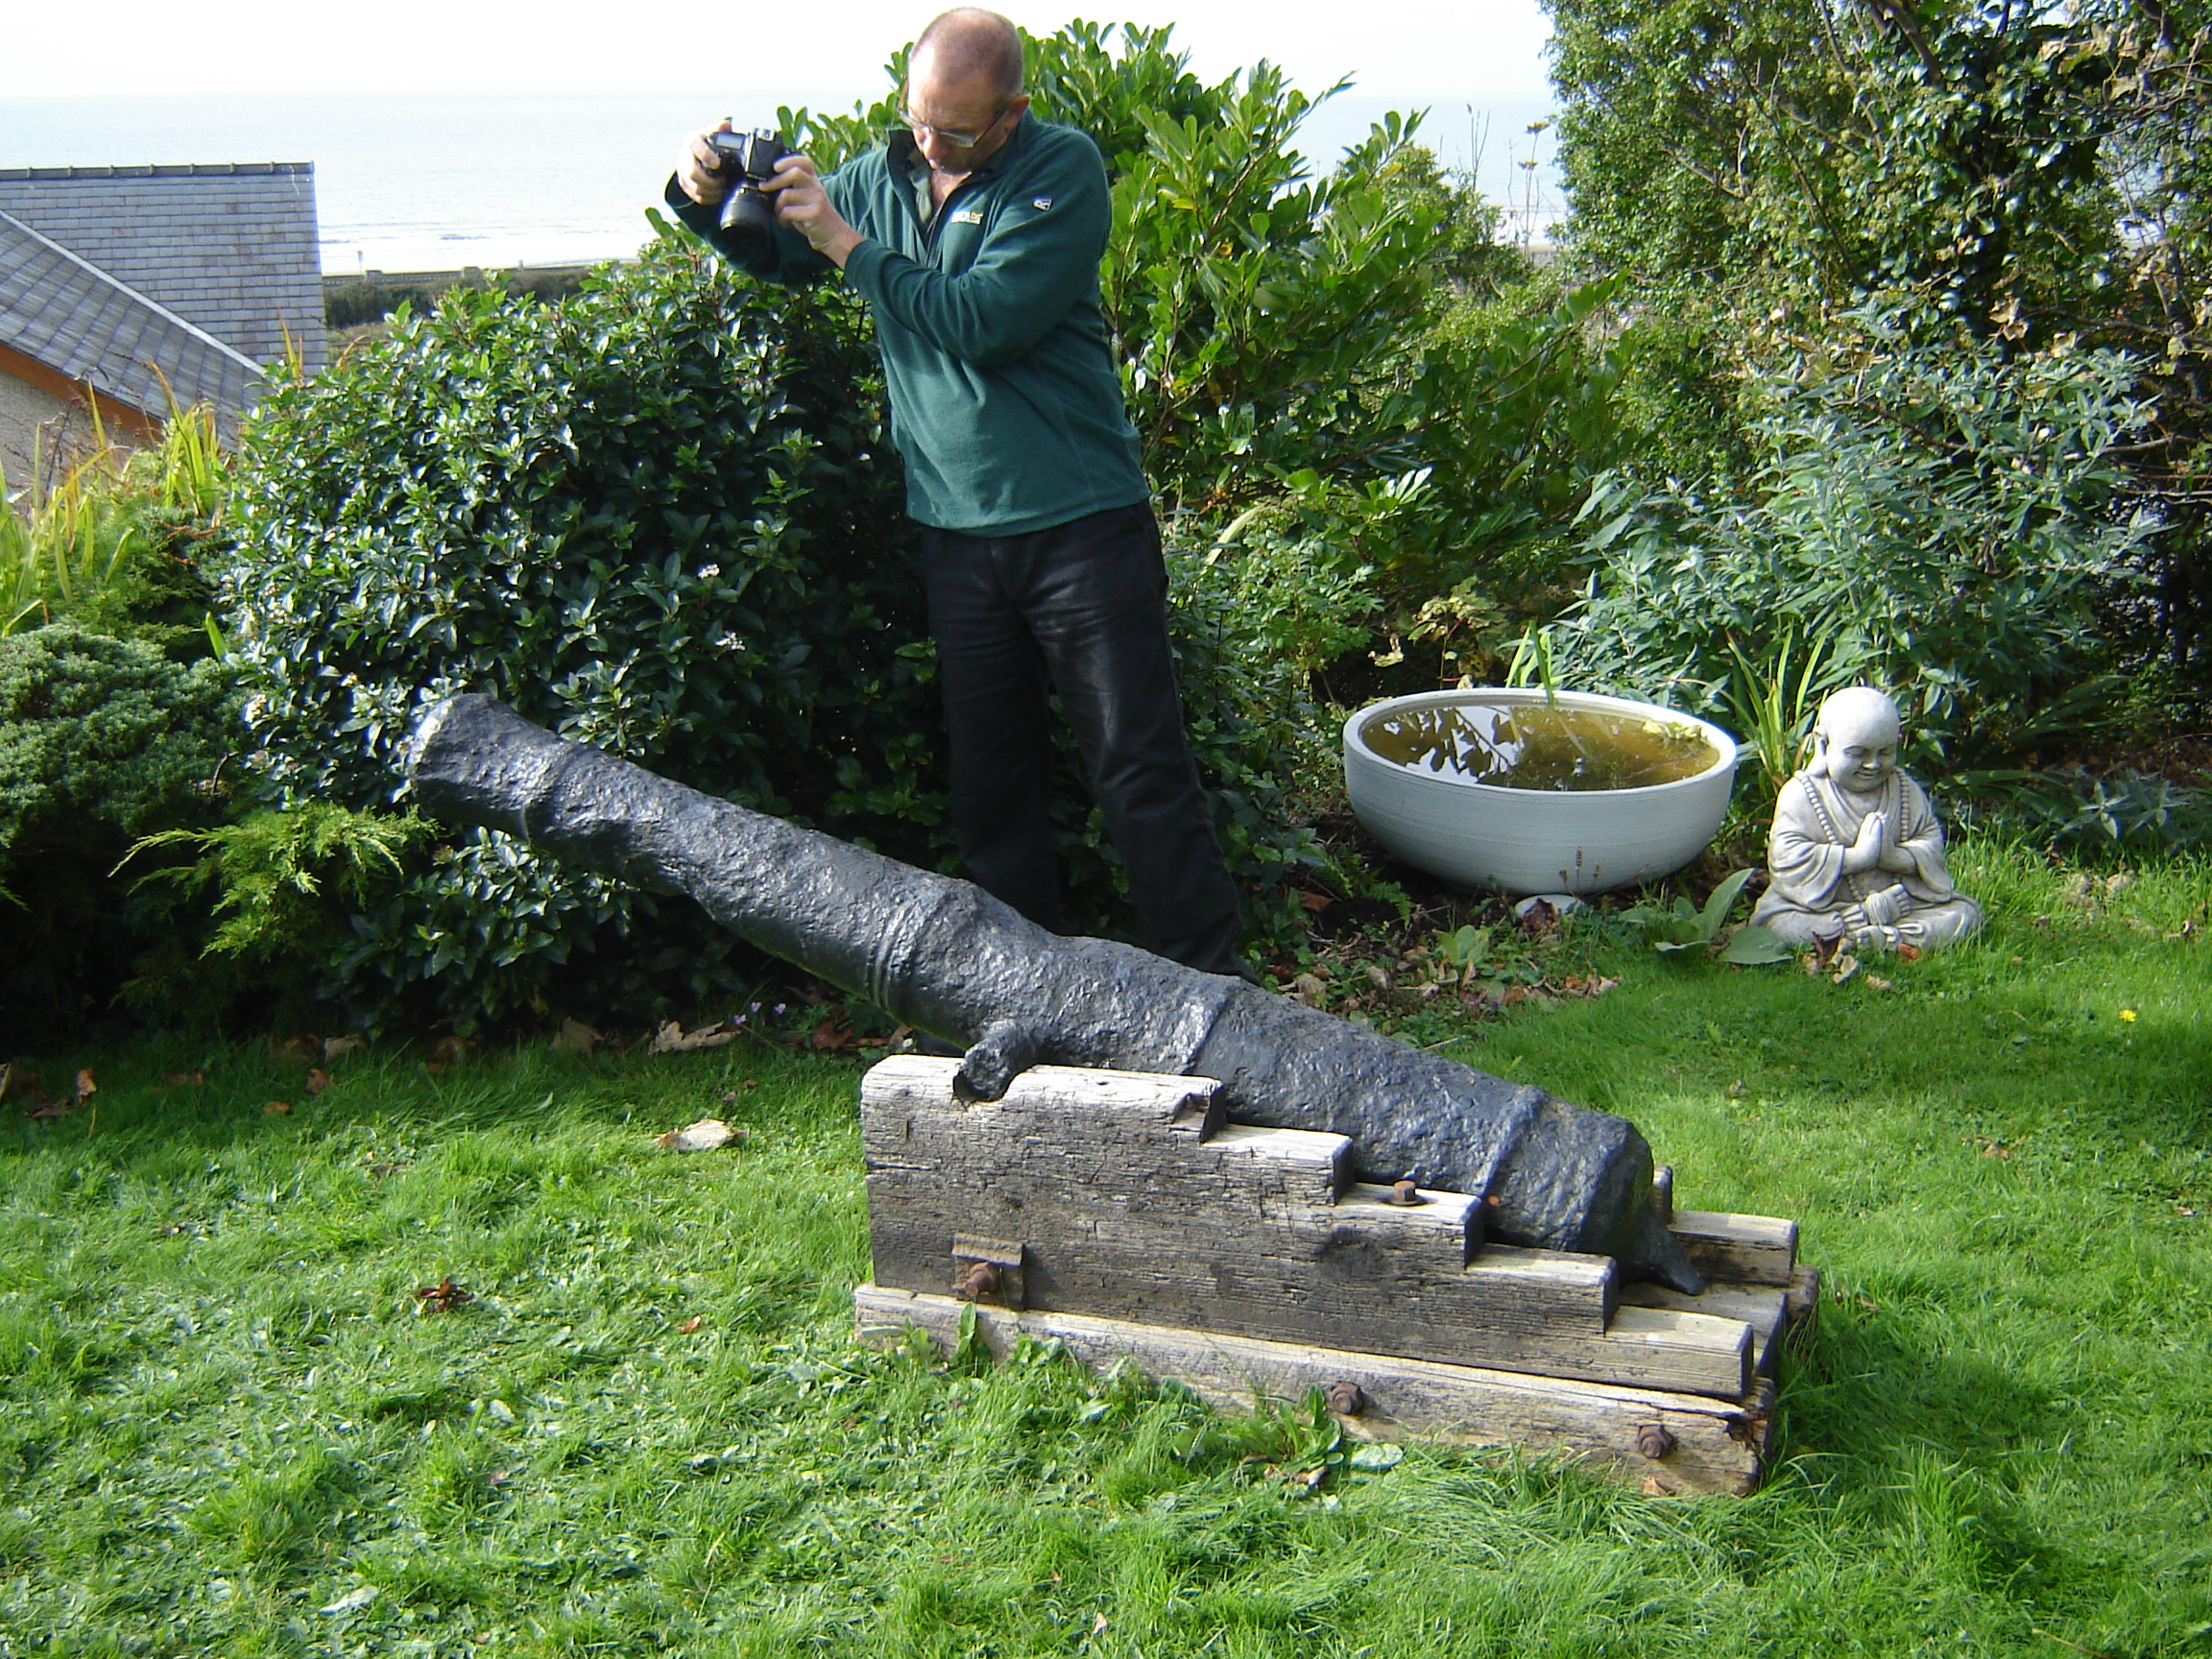 Photographing one of the cannons